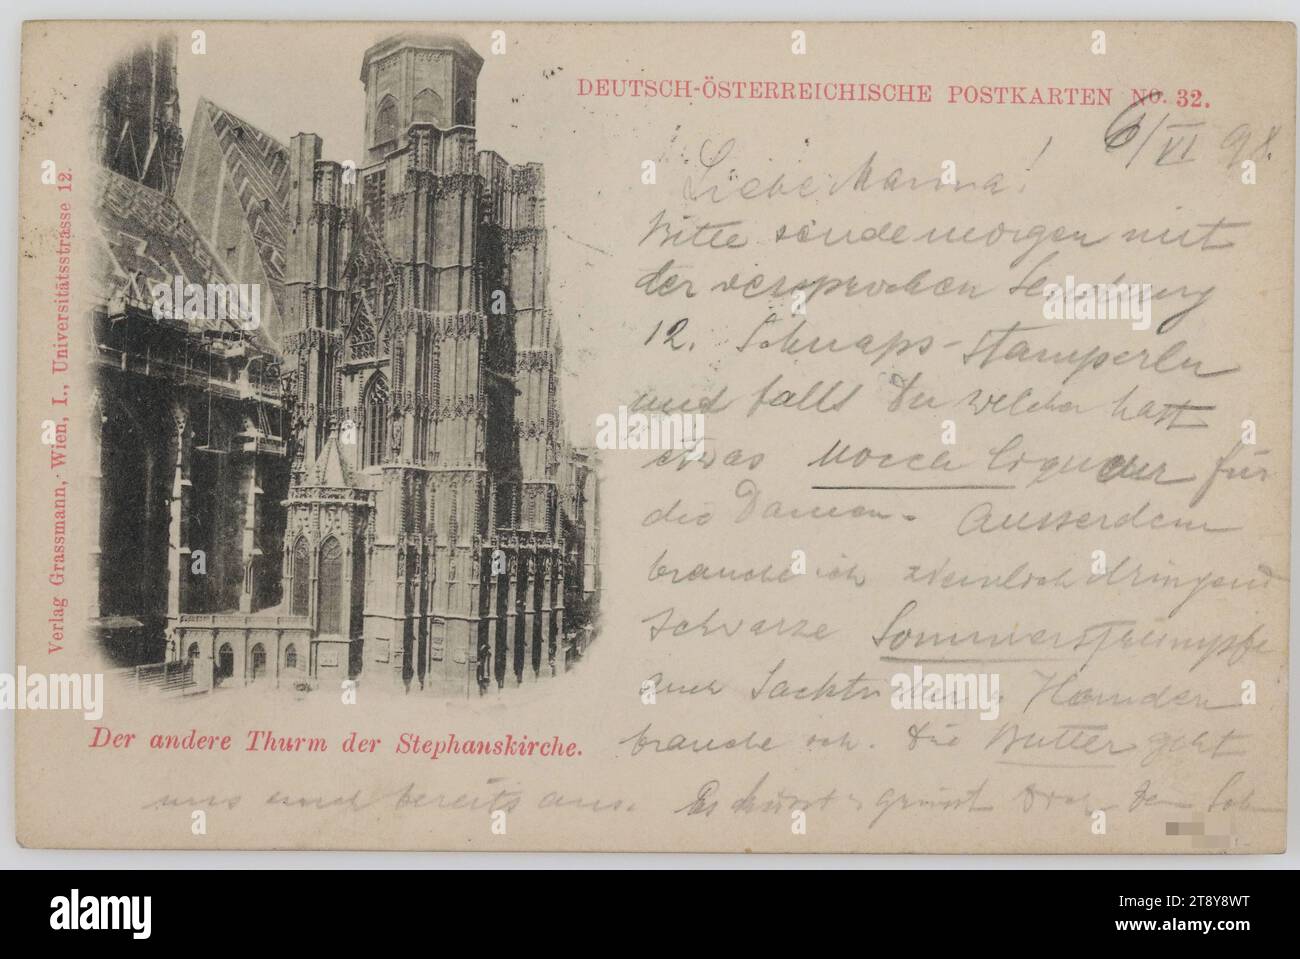 The other Thrum of St. Stephen's Church, publisher Grassmann, producer, 1898, cardboard, collotype, inscription, FROM, Vienna, TO, Vienna, ADDRESS, To Hochwohlg. Frau, Vienna XVII , 2 Zwerngasse 16, MESSAGE, 6.VI.98, Dear Mama!, Please send tomorrow with the promised shipment 12 Schnaps-Stamperln and if you have some Mocca Liqueur for the ladies. I also urgently need black summer stockings, sackcloth and shirts. We are also running out of butter. Es küsst u. grüsst froh Dein Sohn, Stephansdom, media and communication, postcards with transliteration, 1st district: Innere Stadt Stock Photo